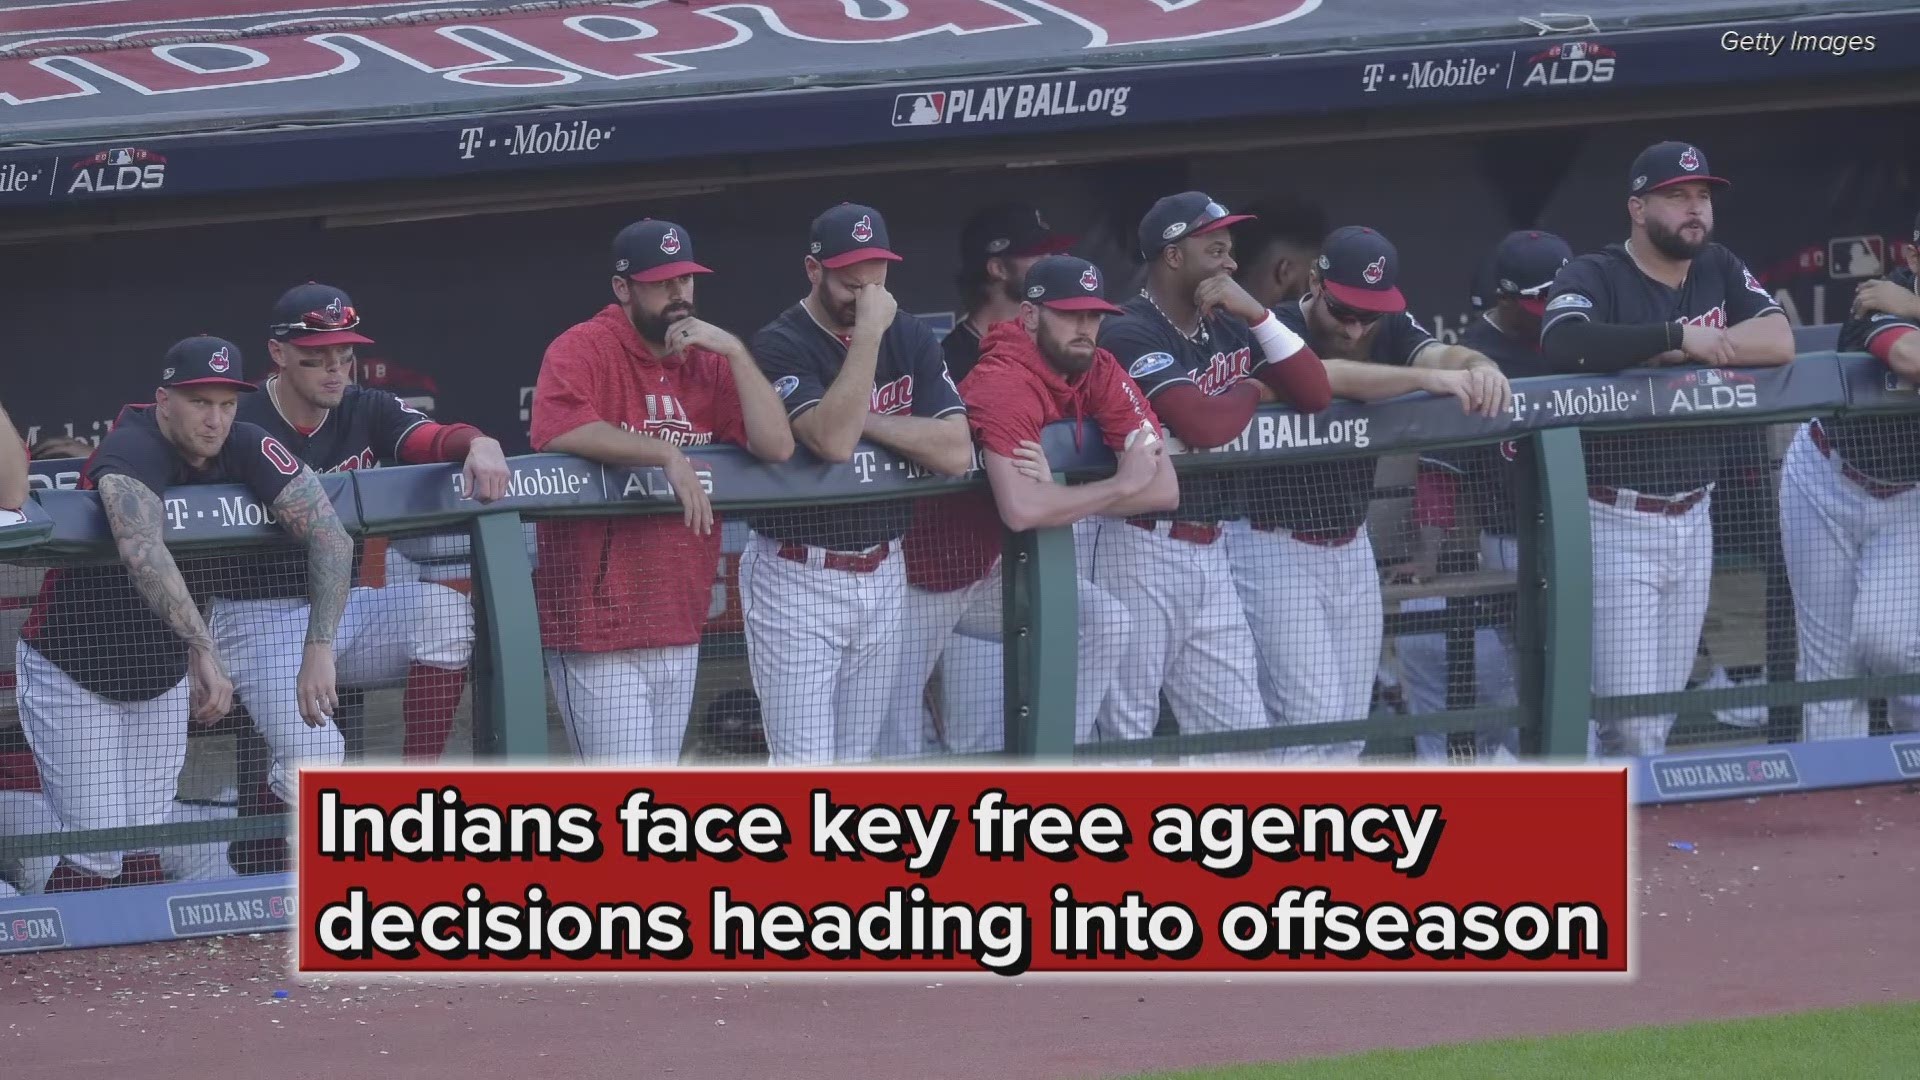 Indians face decisions this off-season